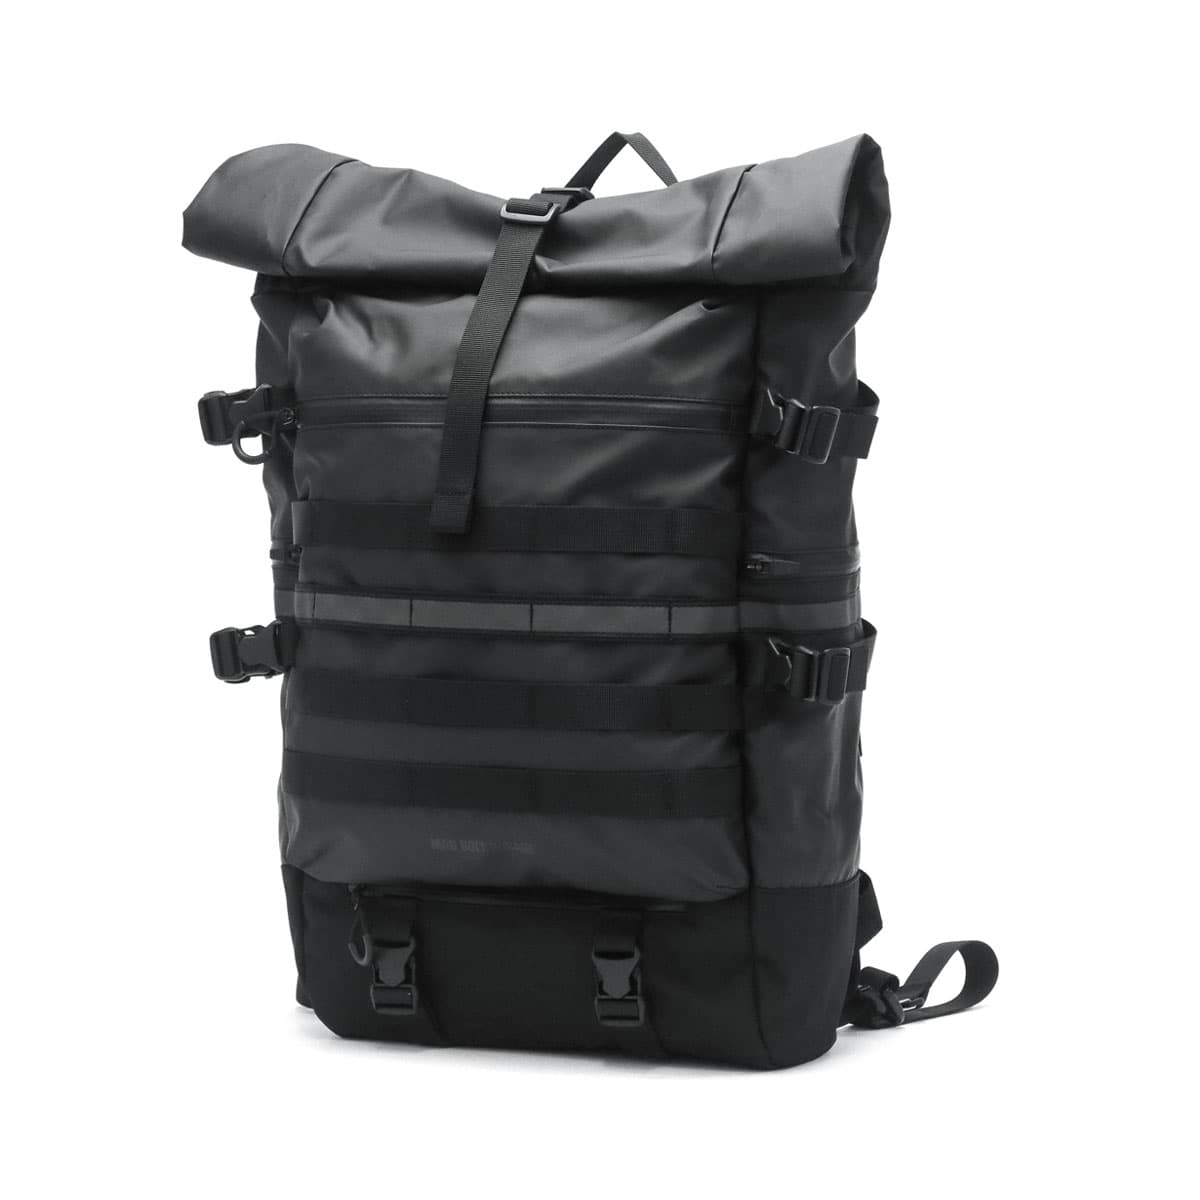 MBG Design by MAKAVELIC ROLL TOP DAYPACK マキャベリック デイパック ...